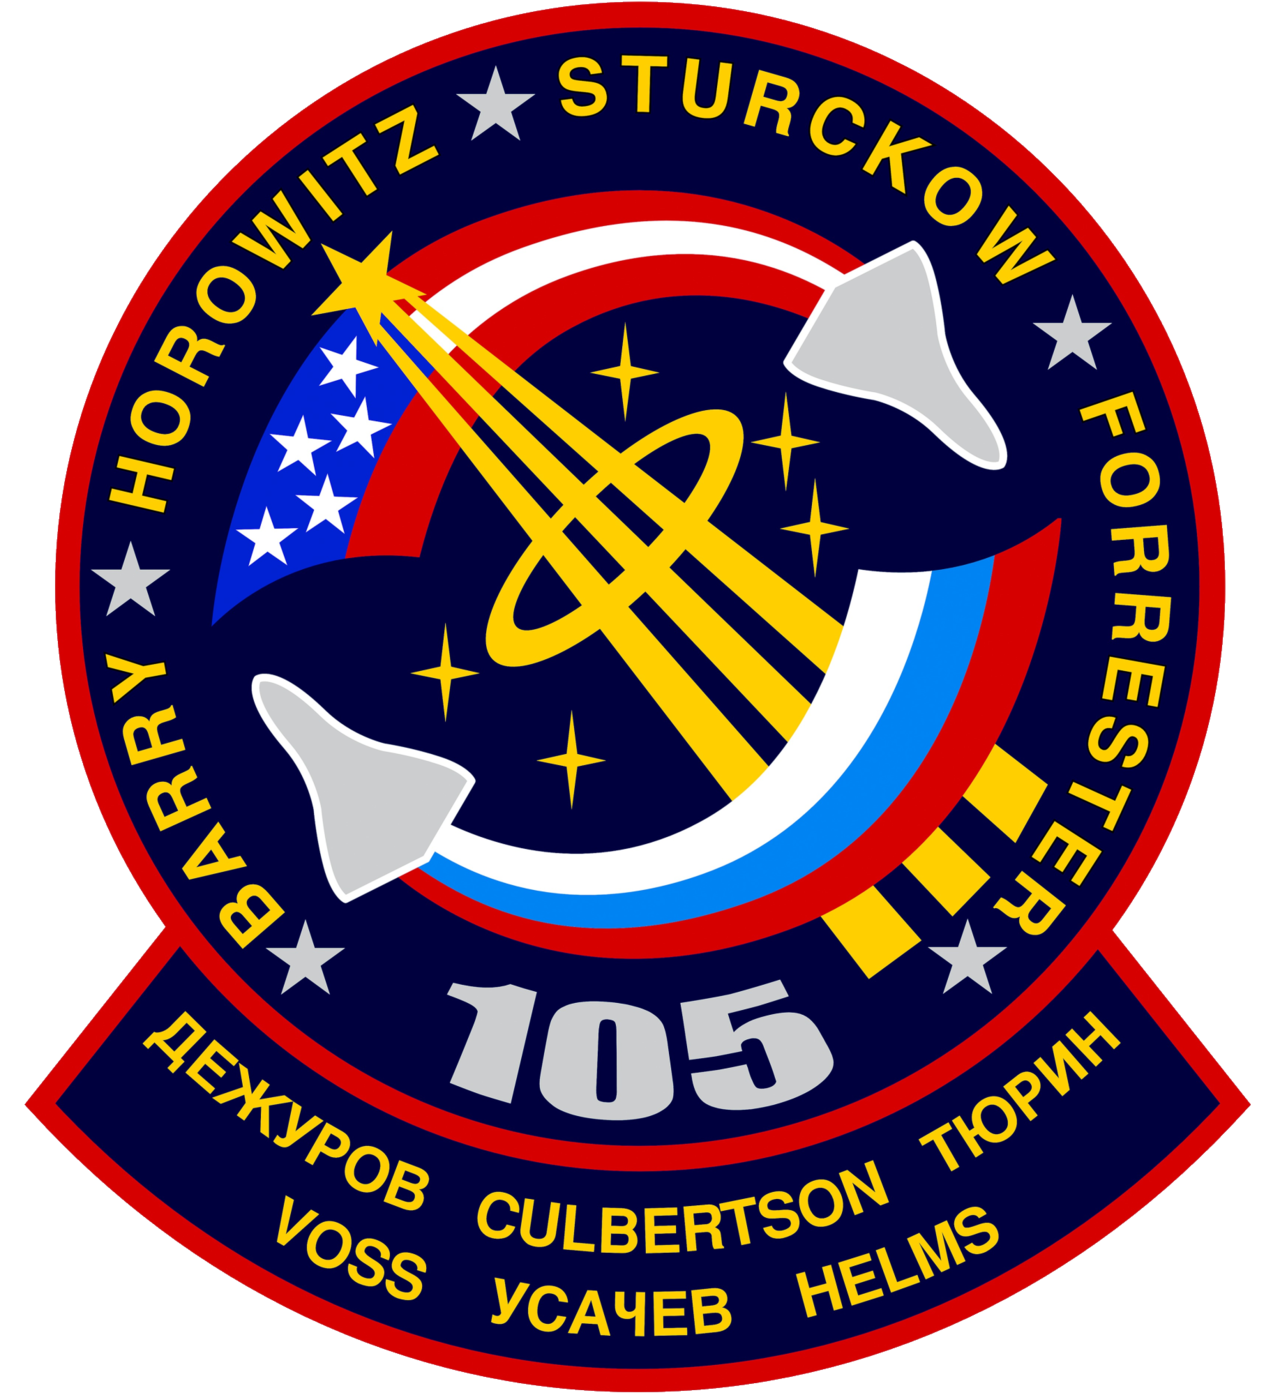 Mission patch for STS-105